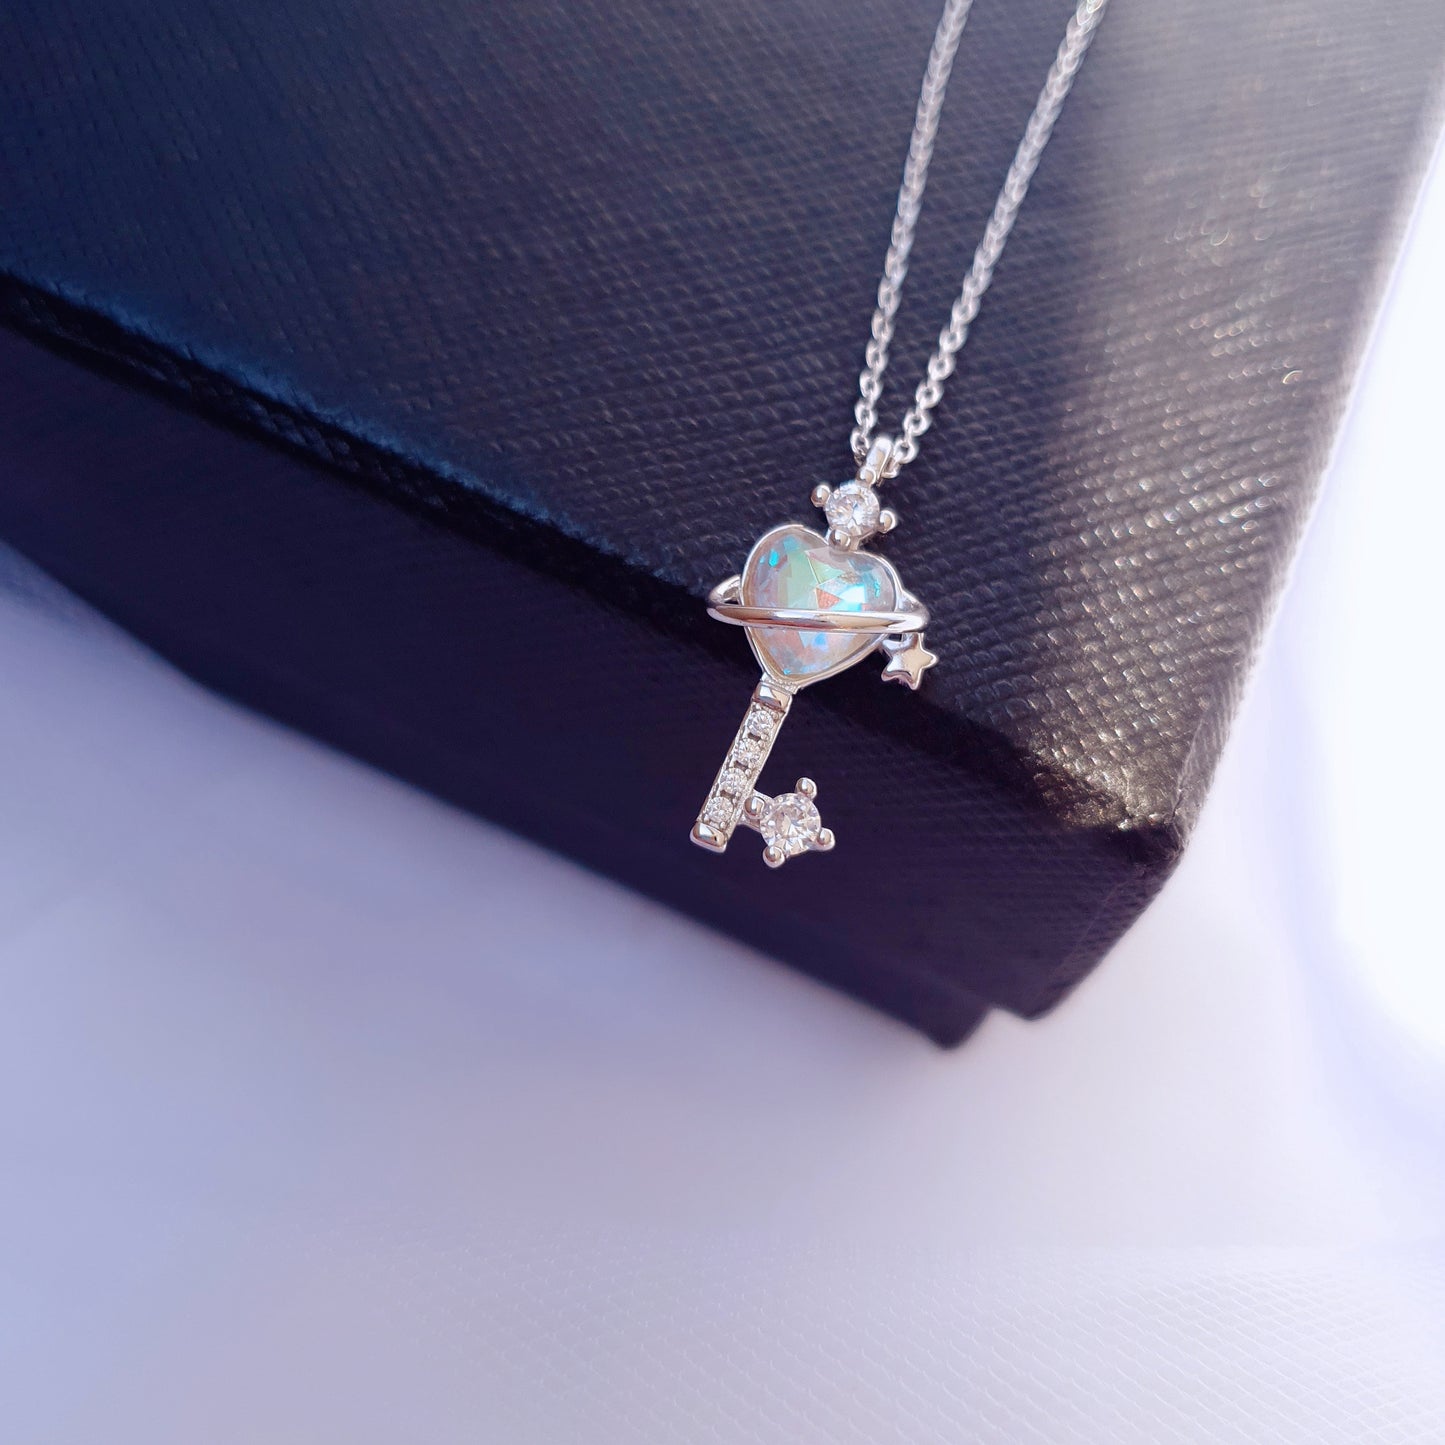 Key To Heart Necklace in Sliver (Aurora Stone)